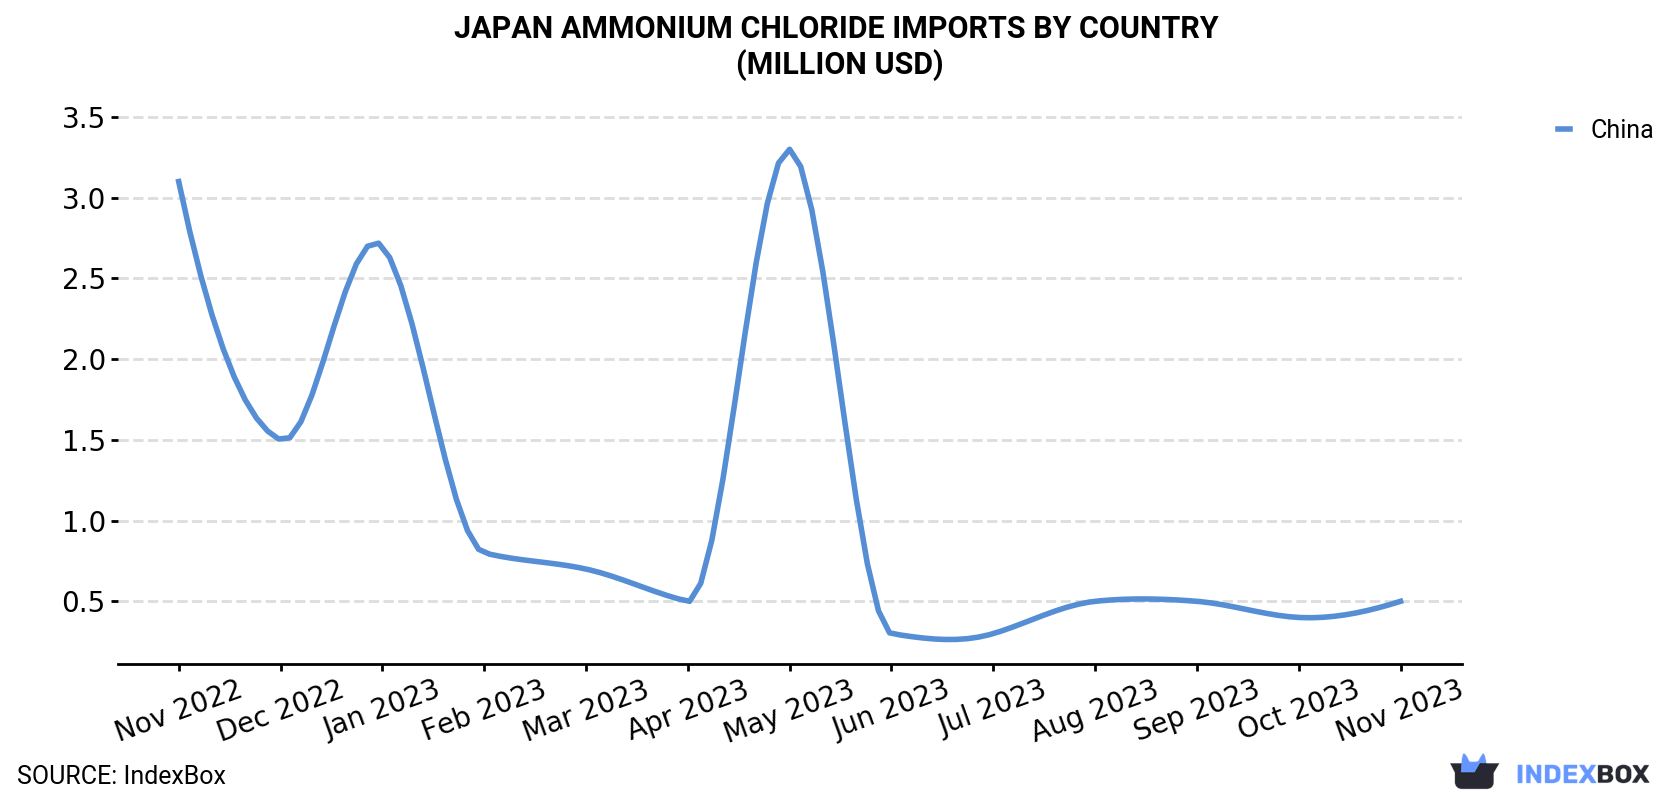 Japan Ammonium Chloride Imports By Country (Million USD)